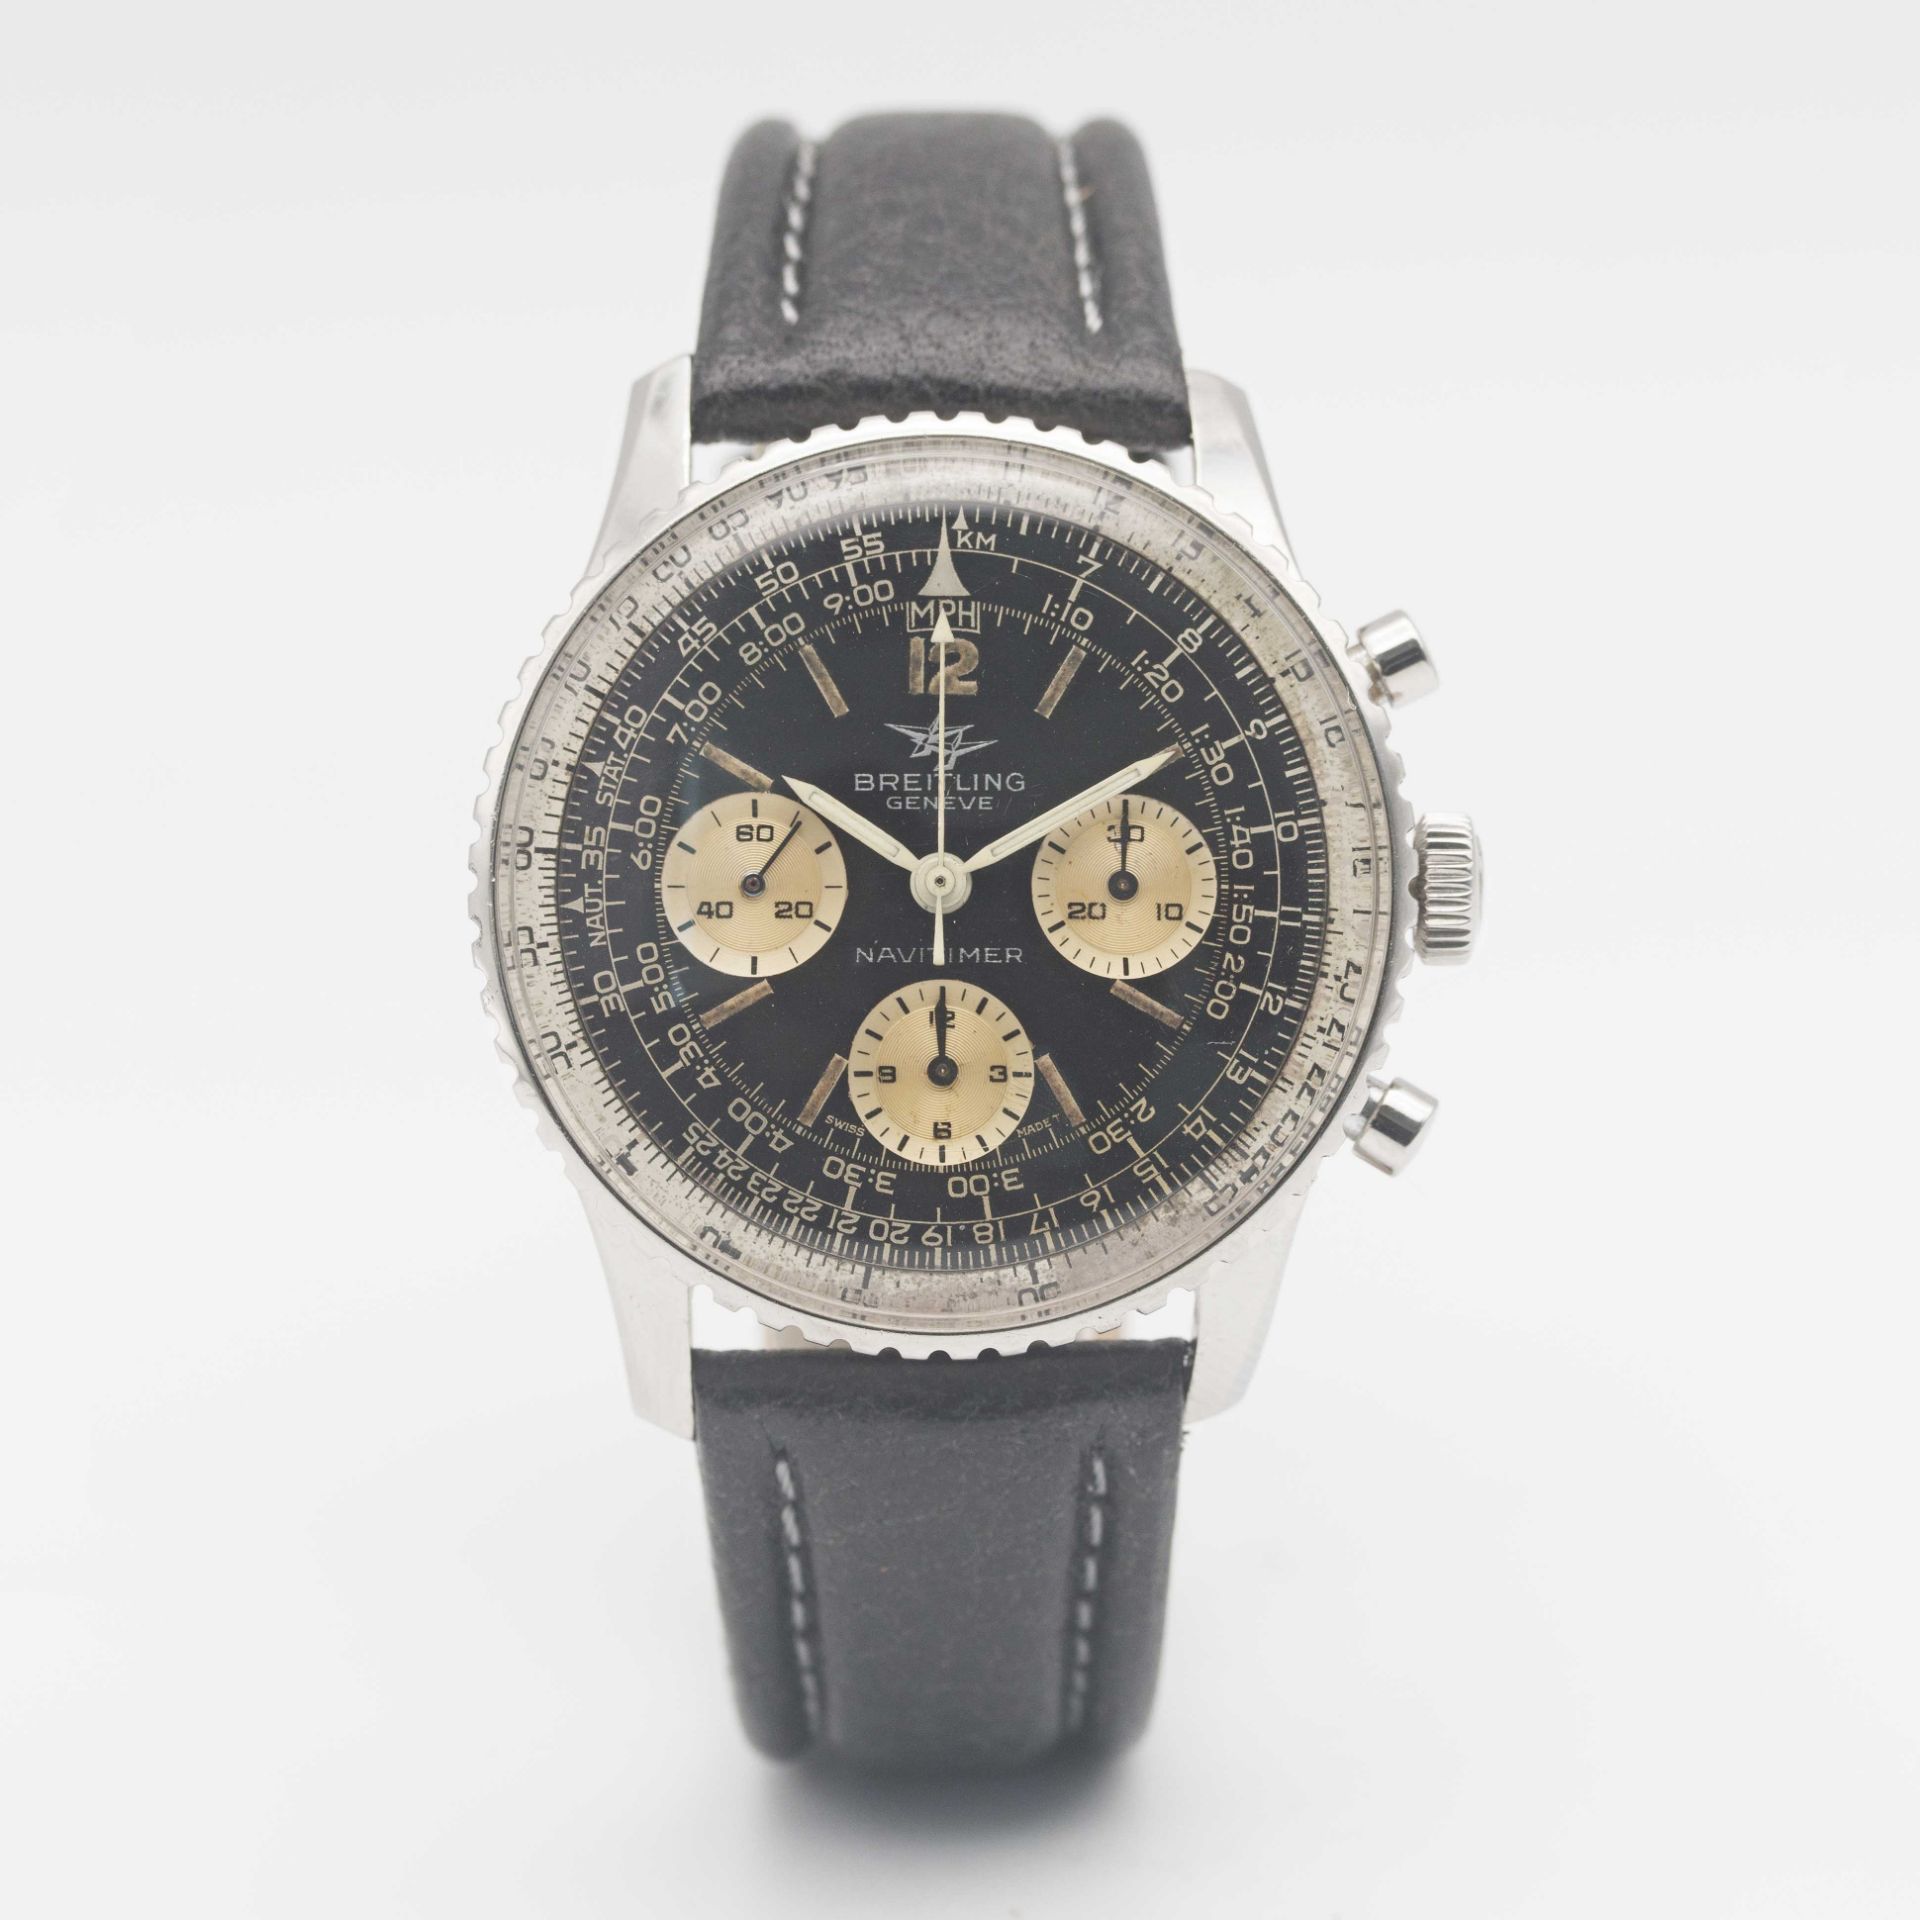 A GENTLEMAN'S STAINLESS STEEL BREITLING NAVITIMER CHRONOGRAPH WRIST WATCH CIRCA 1966, REF. 806 - Image 2 of 9